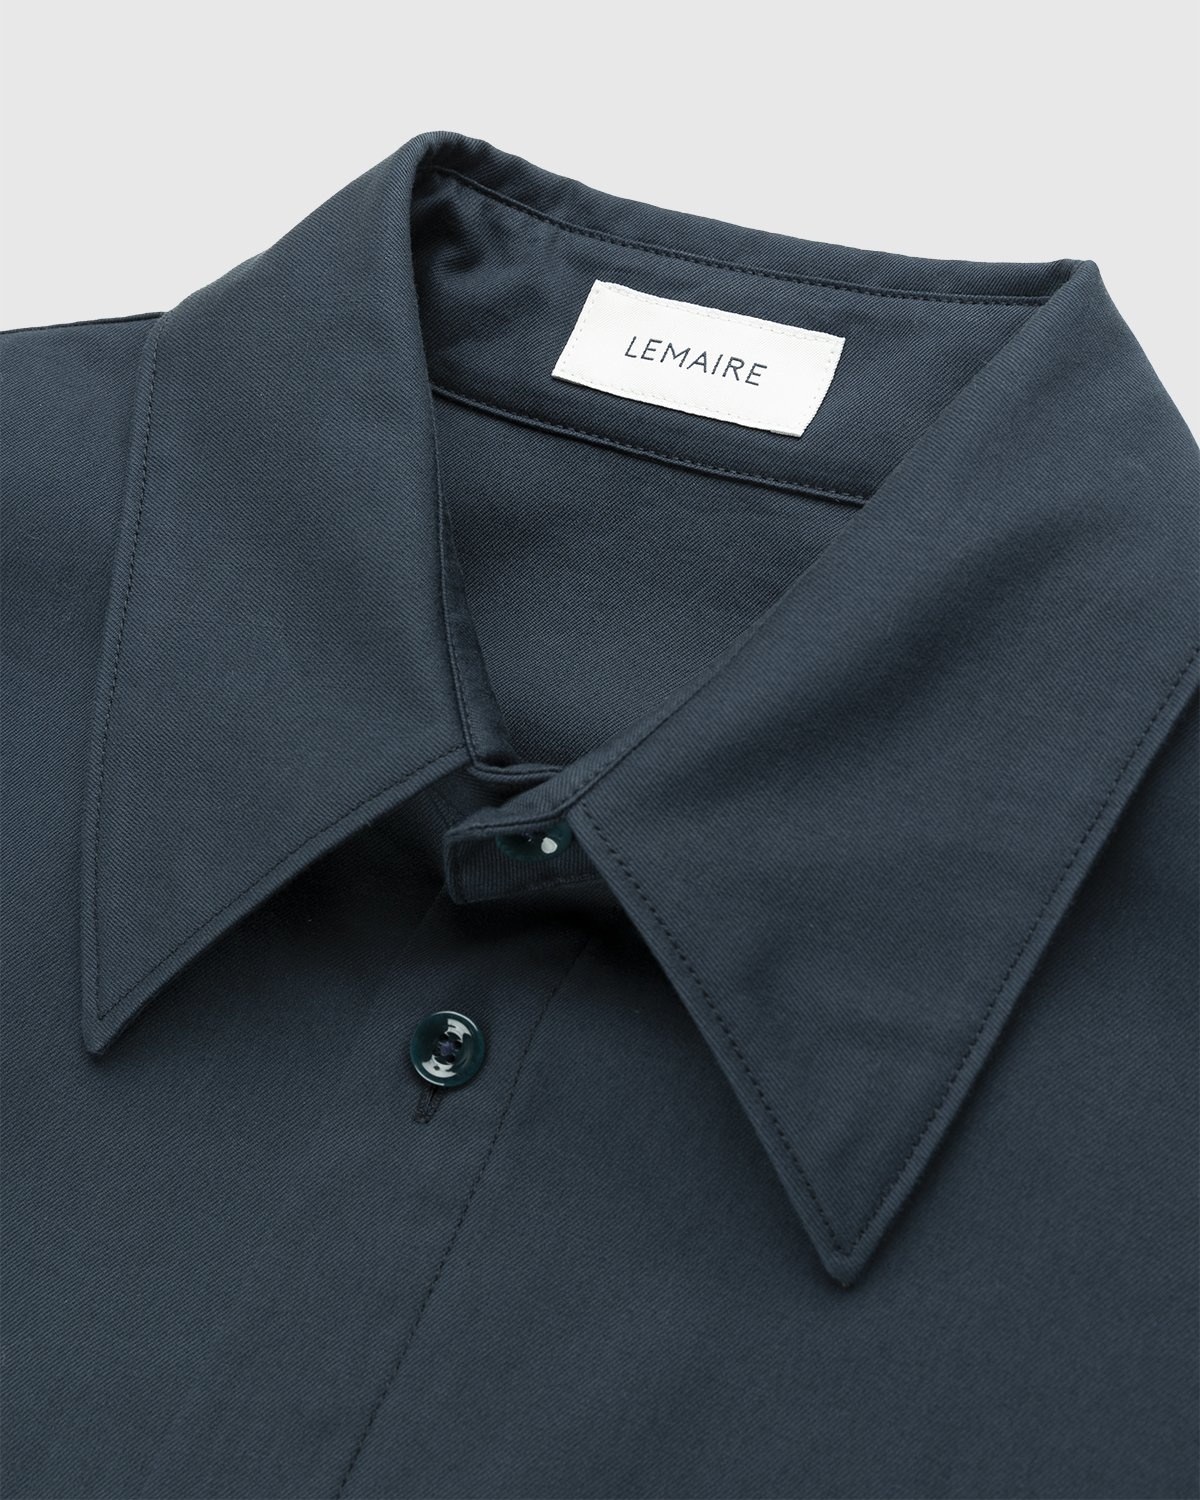 Lemaire – Brushed Blouse Shirt Top Vulcan Blue - Shirts - Blue - Image 3